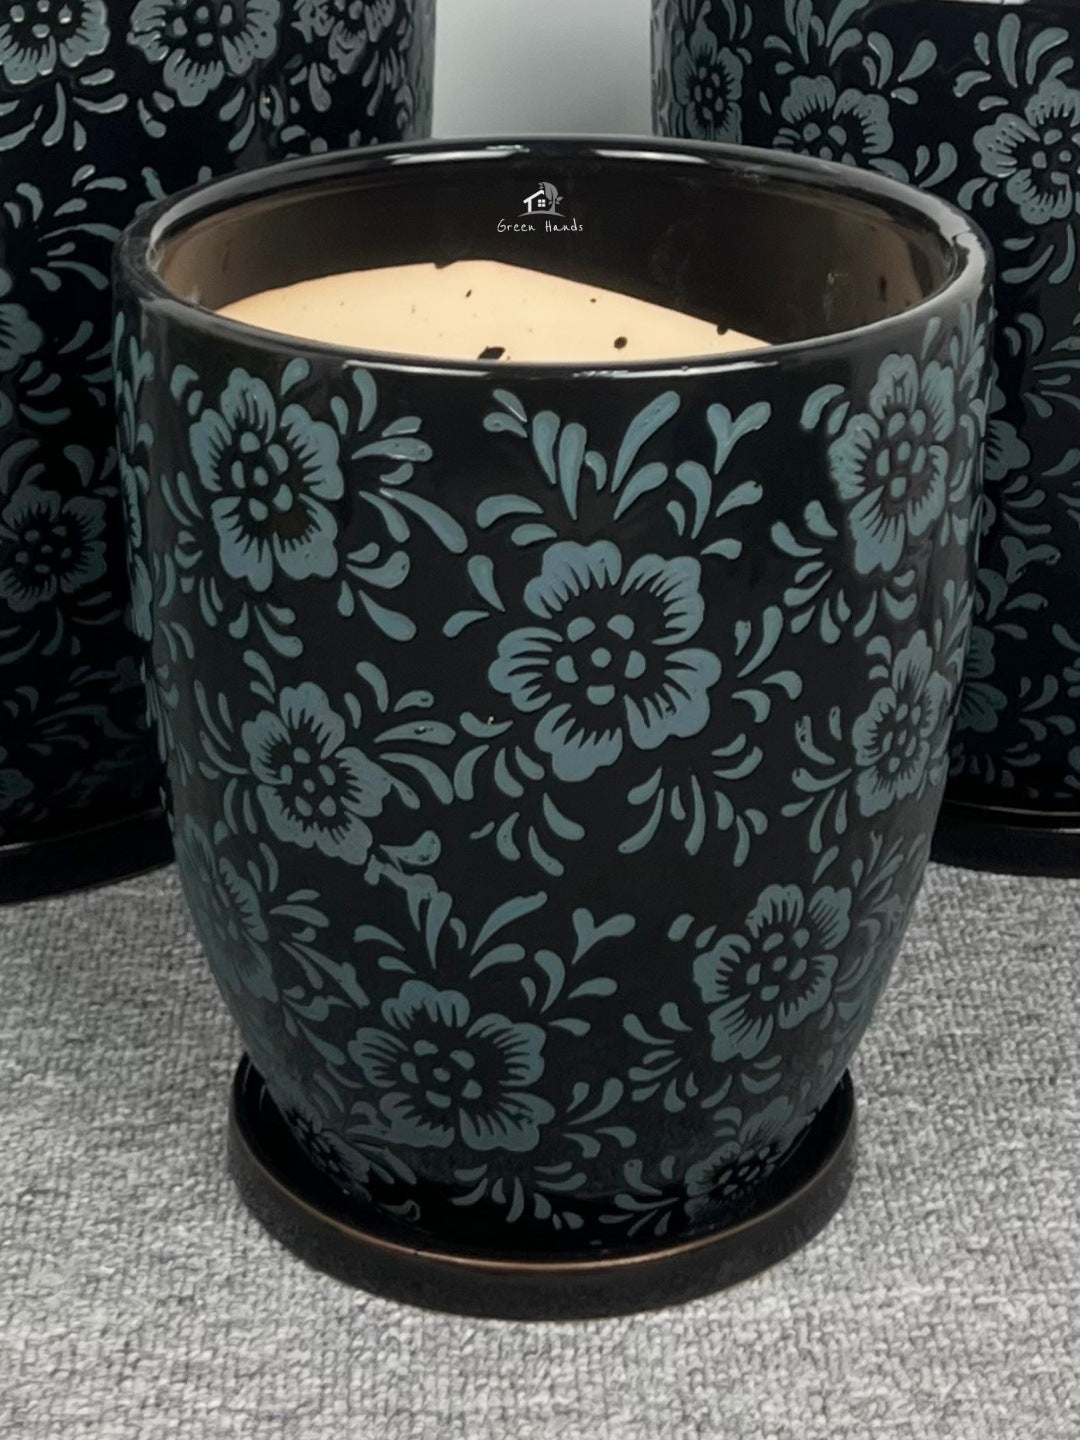 Japanese Art-Inspired Ceramic Pots - Black & Blue Floral Design with Drain Holes and Base Plates